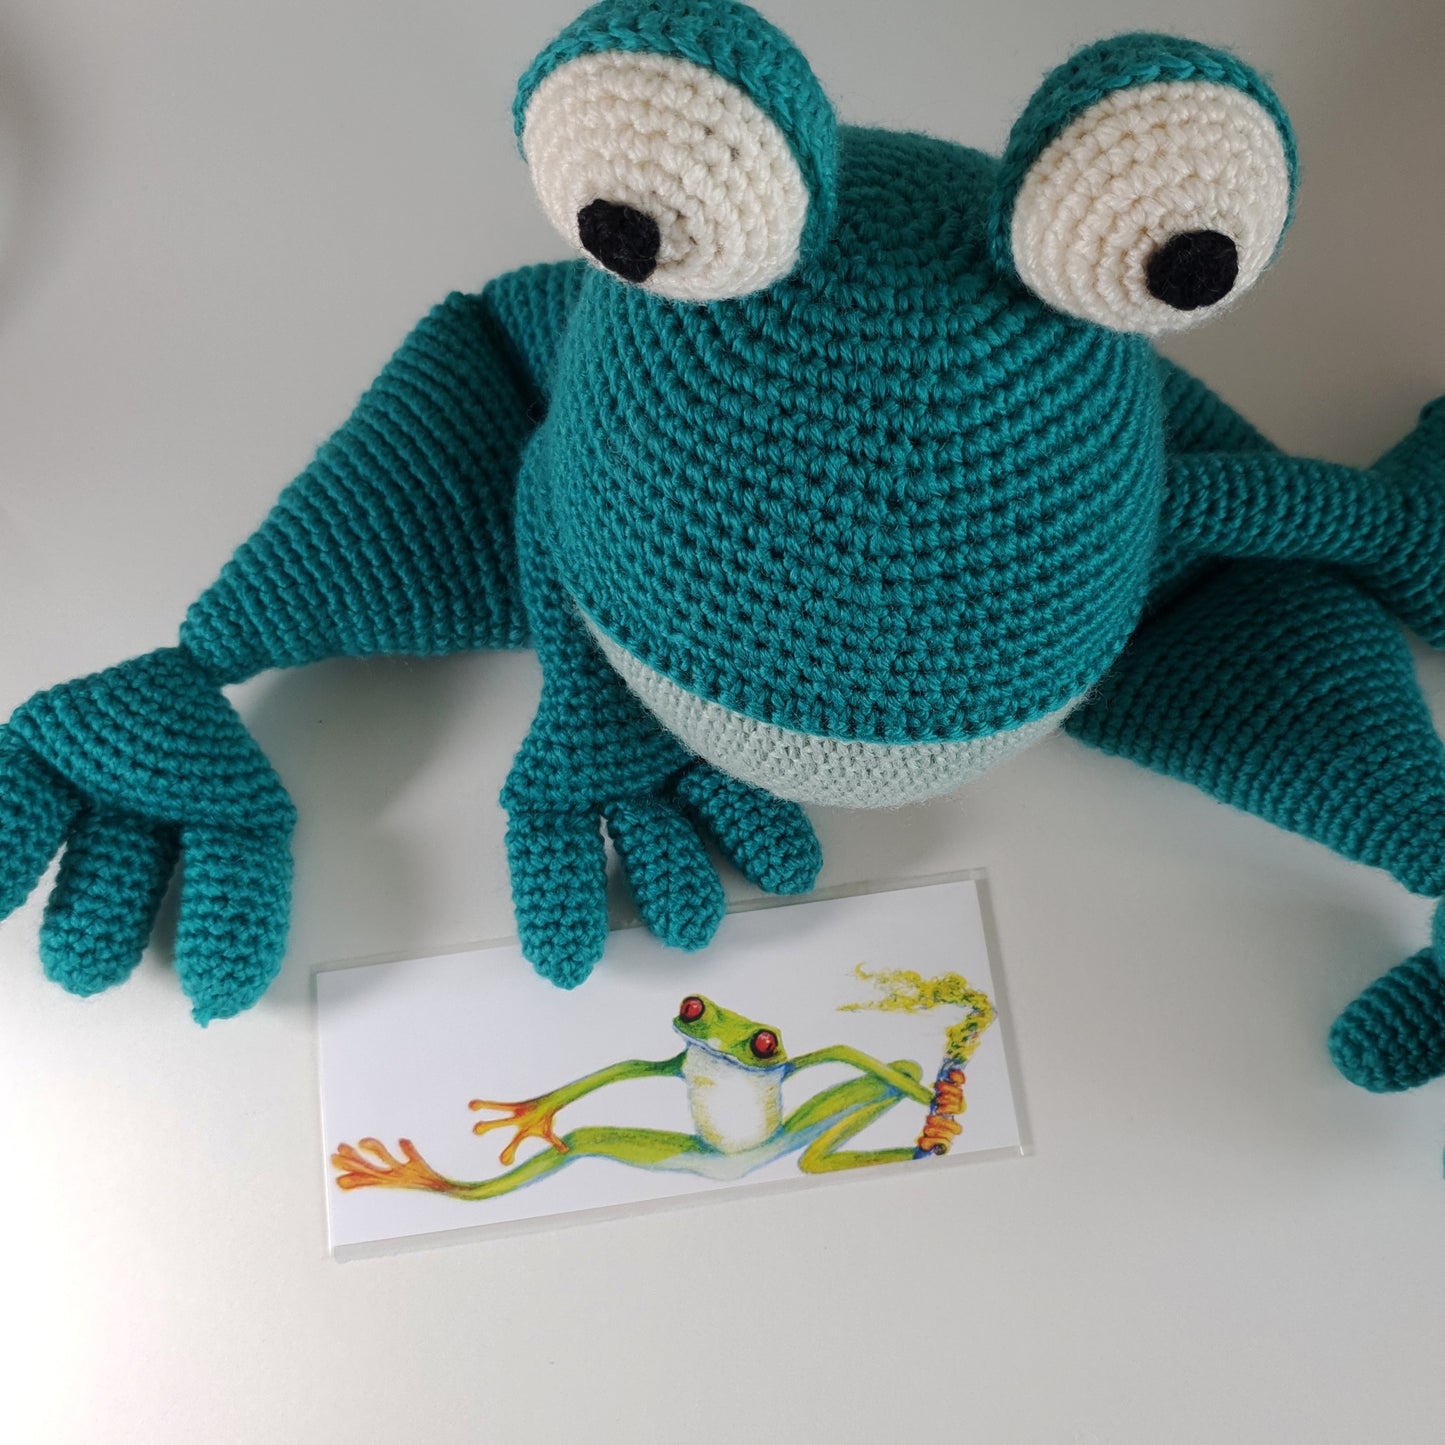 Crocheted Frog in aqua and soft green